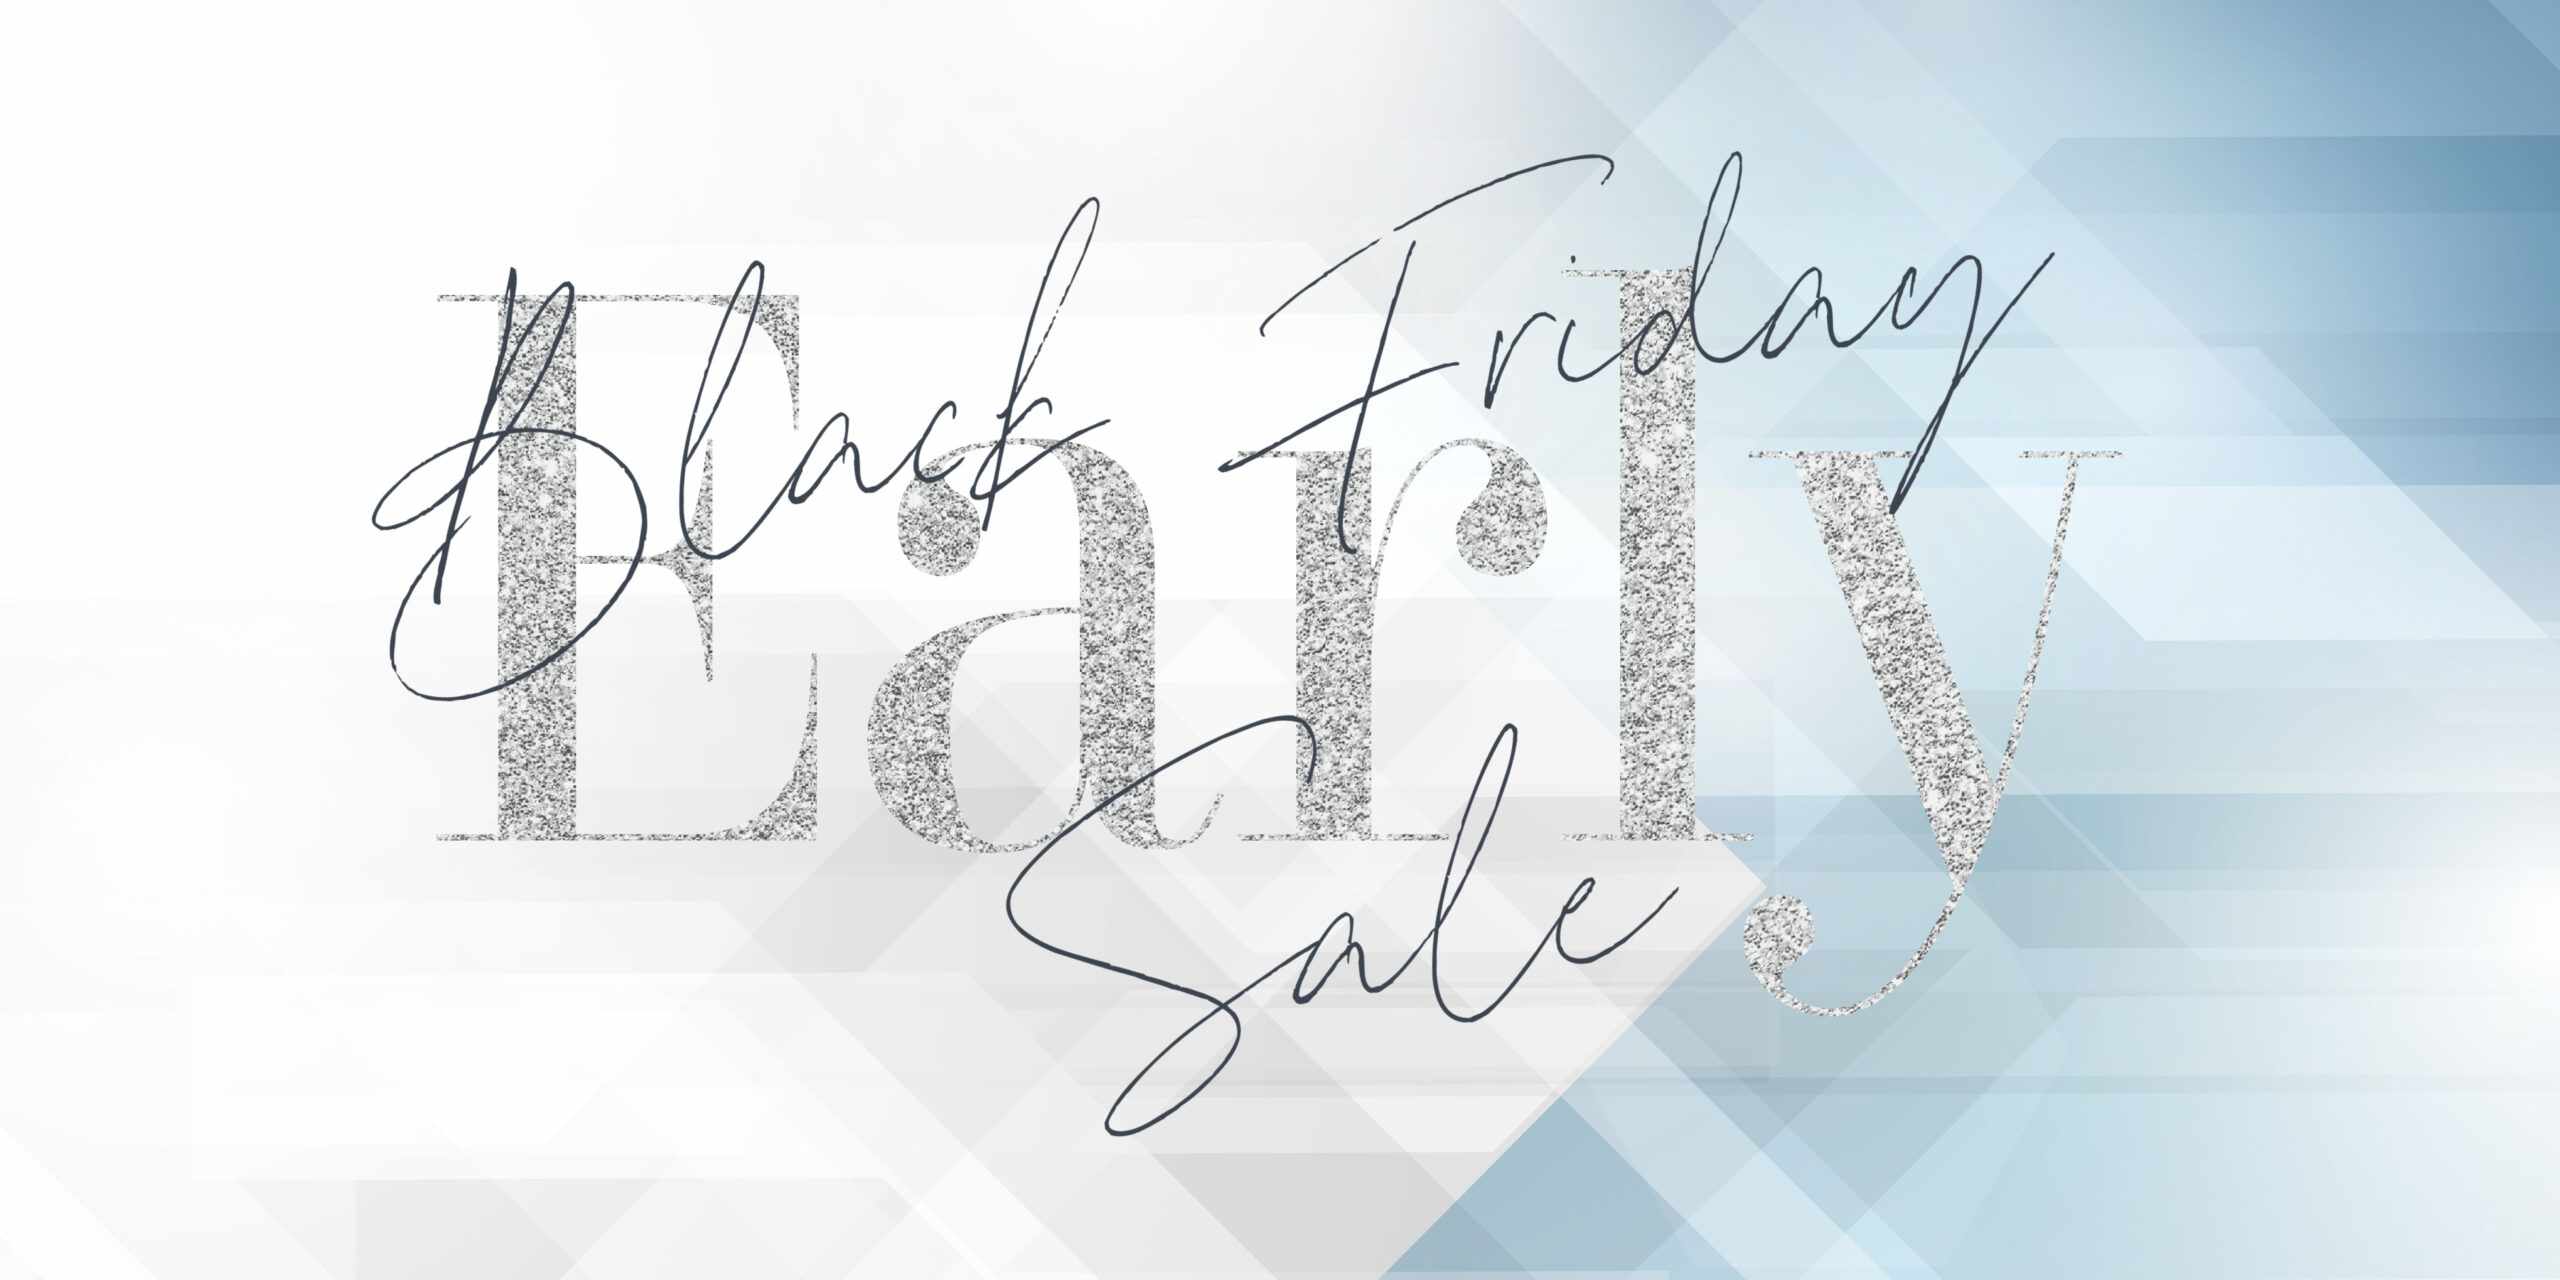 A black friday sale banner with silver lettering.